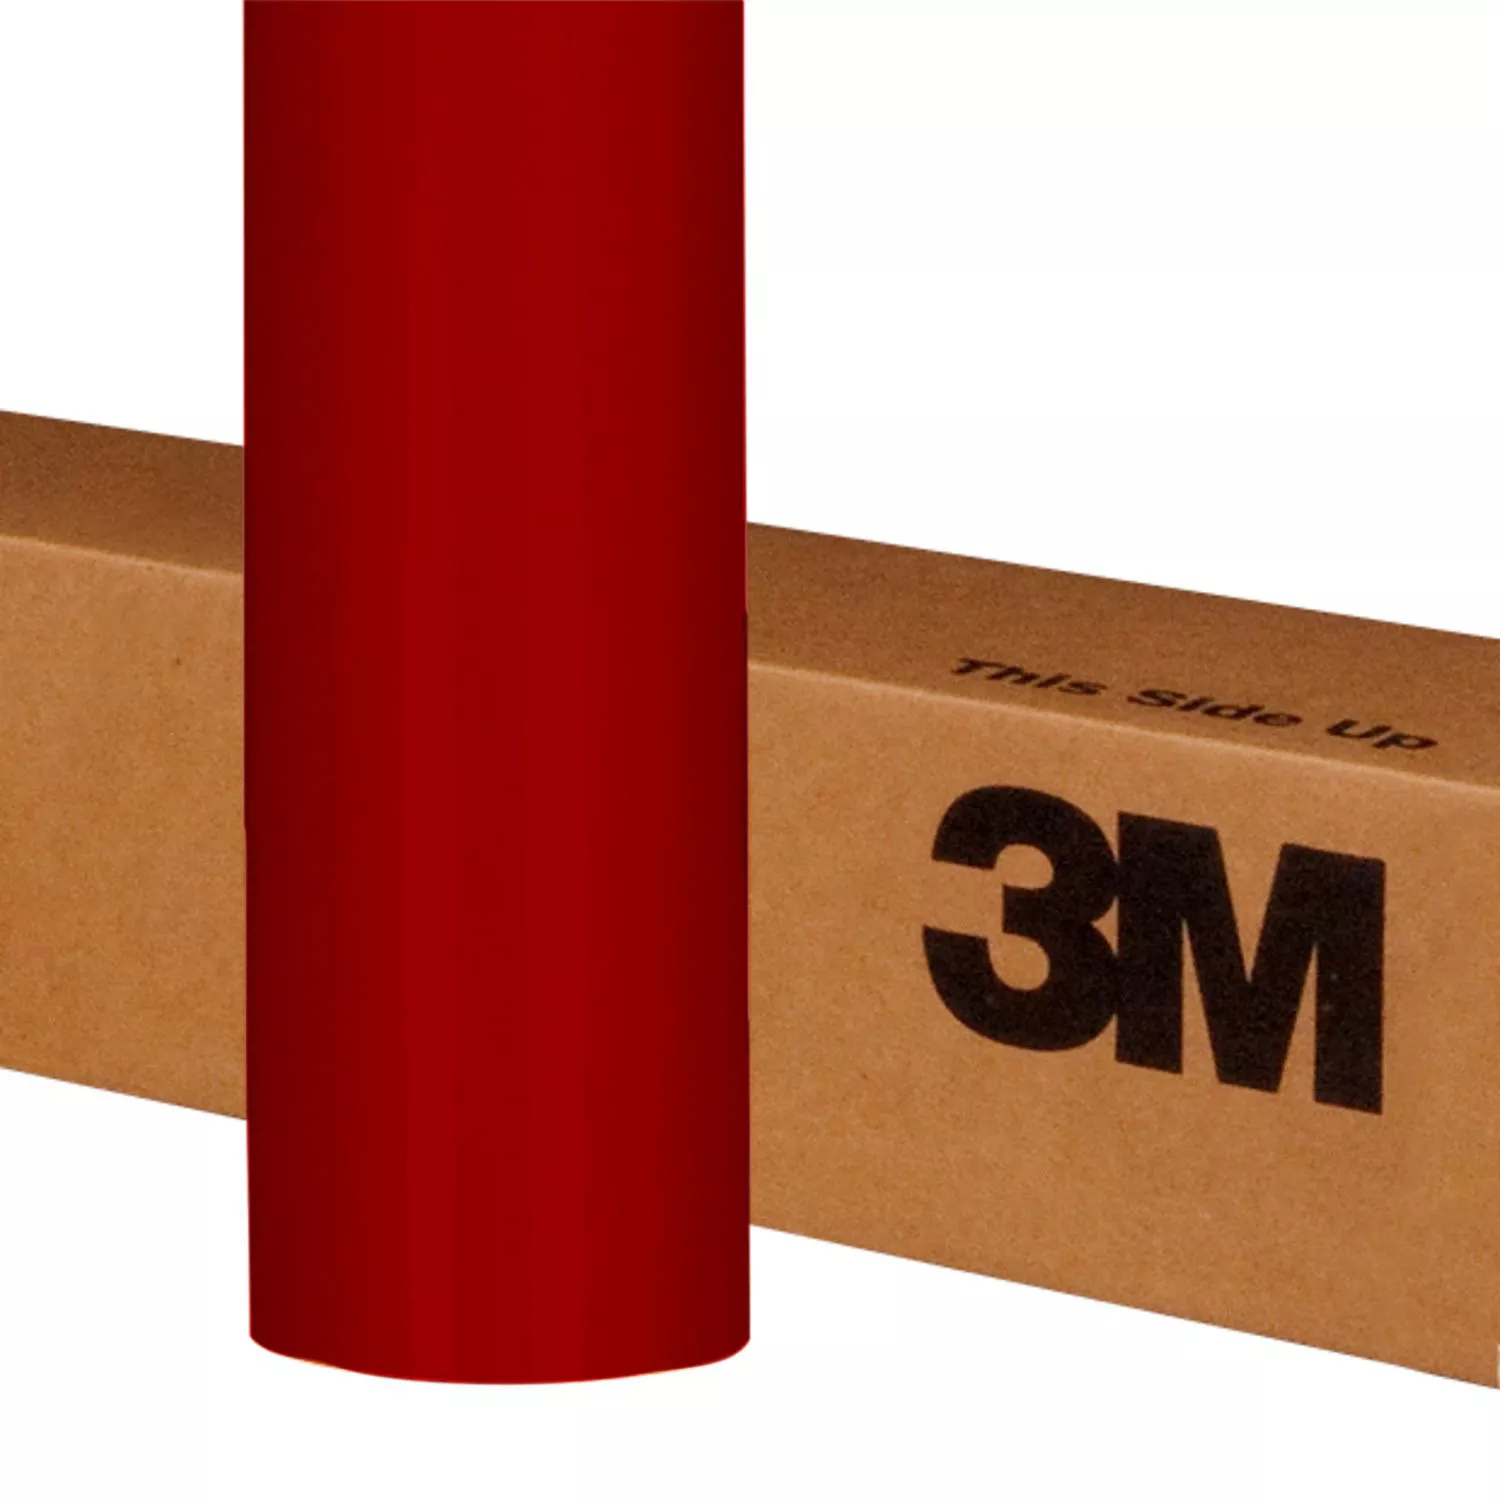 3M™ Scotchcal™ ElectroCut™ Graphic Film 7725-93, Imperial Red, 48 in x
50 yd